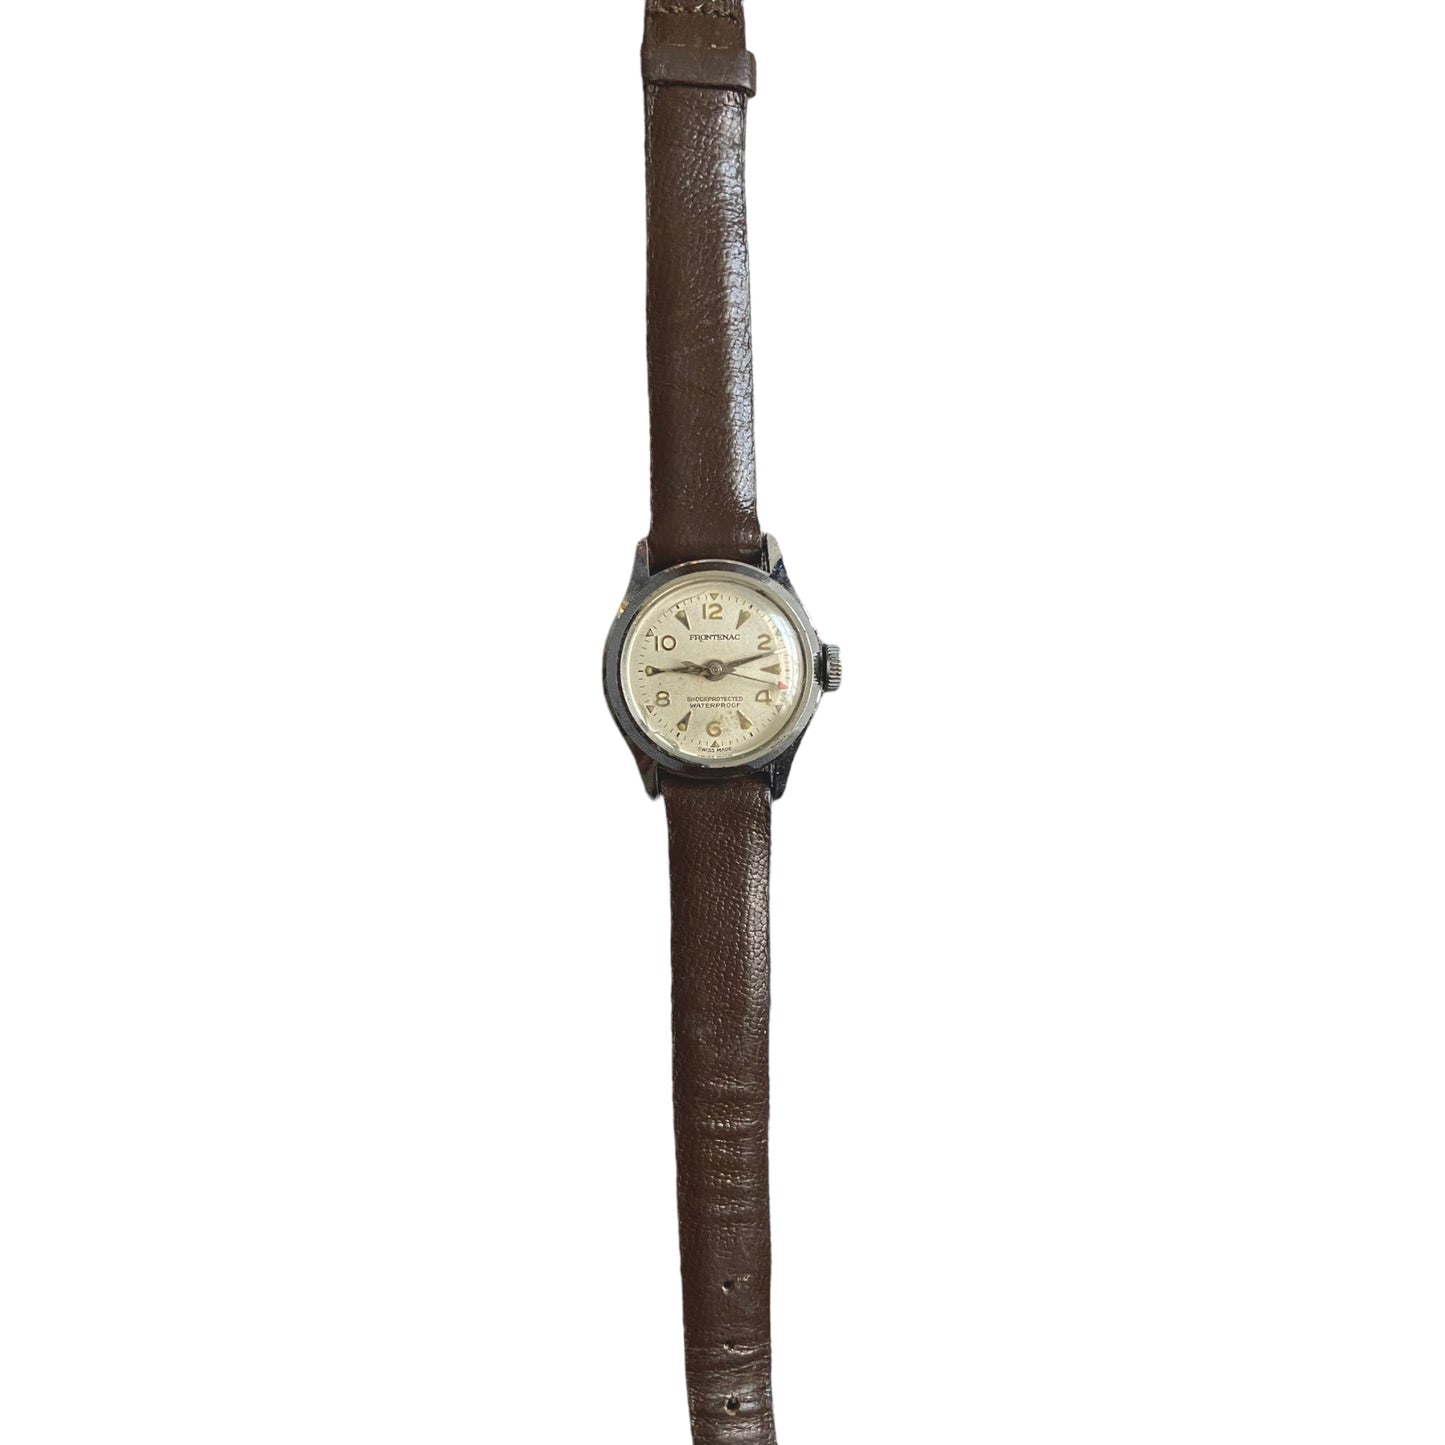 One-of-one | frontenac shockprotected waterproof Swiss made brown leather watch